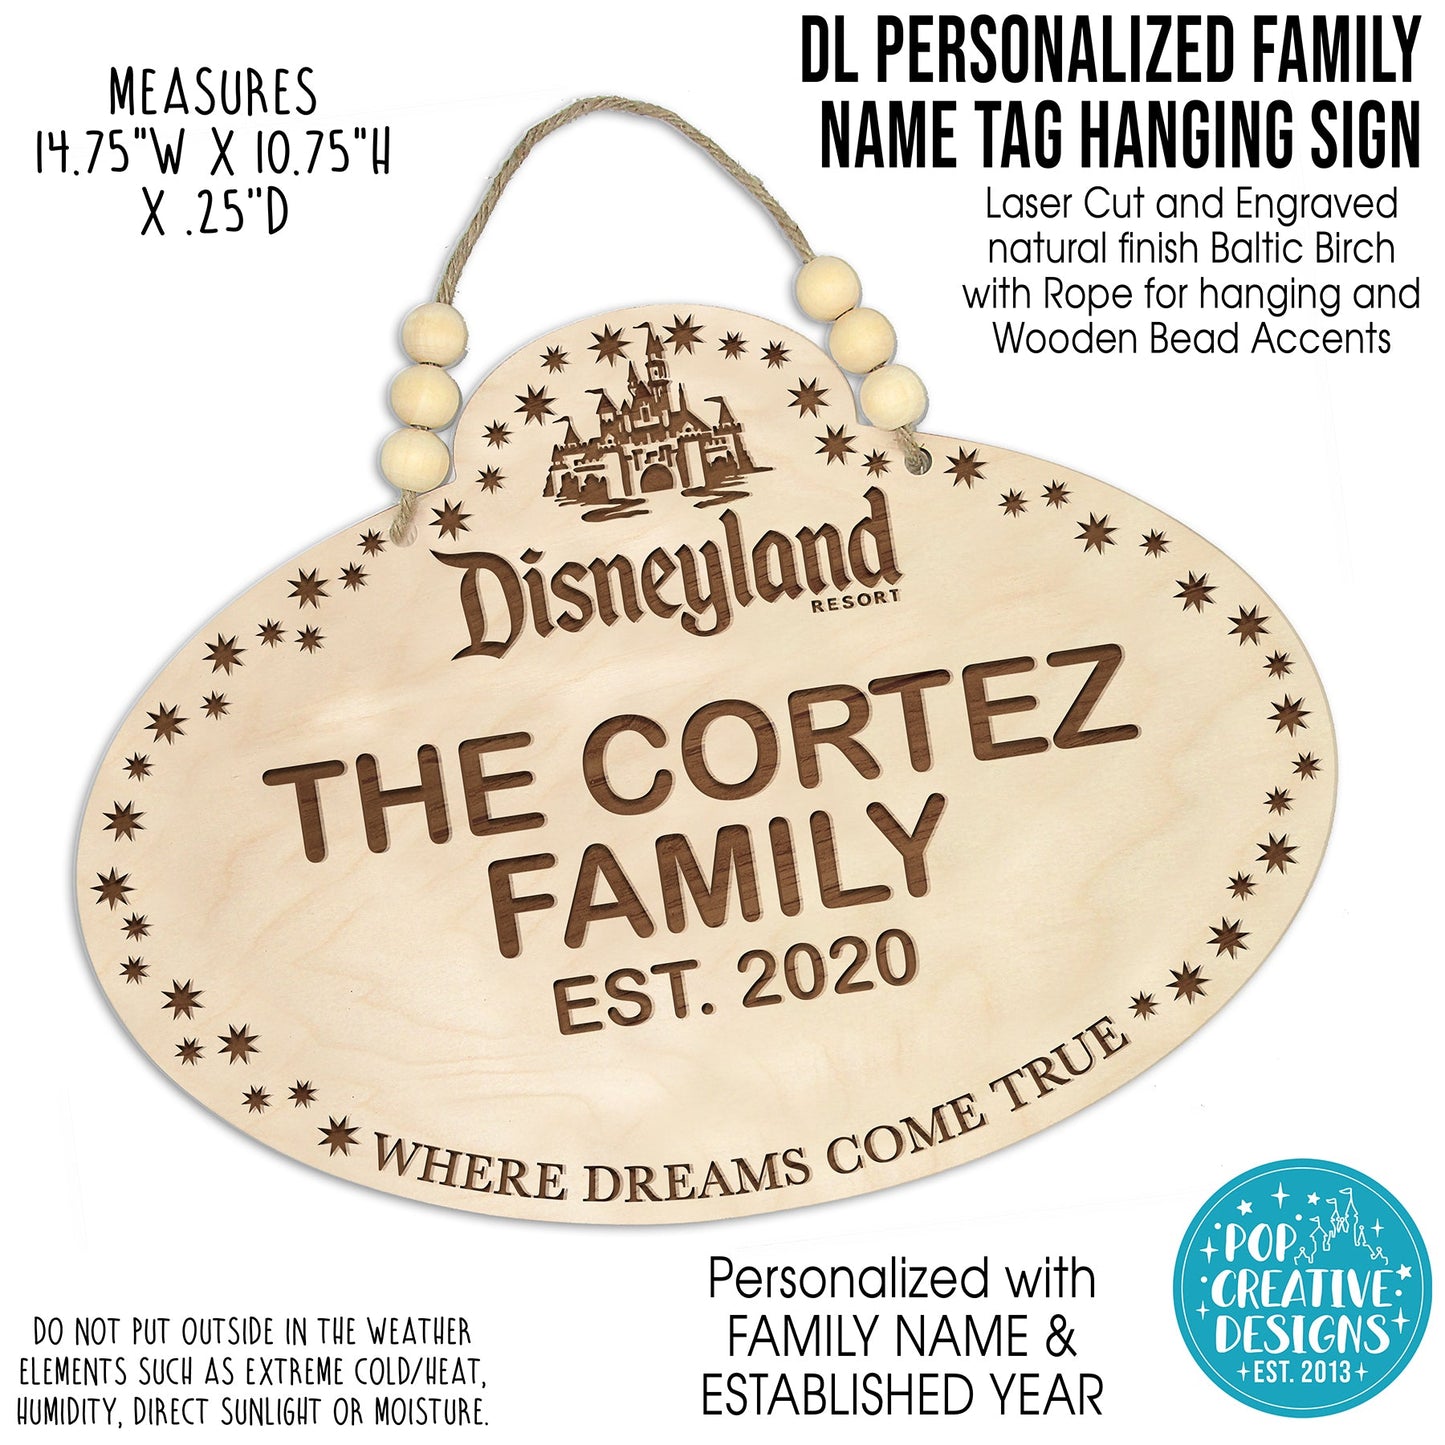 DL Personalized Family Name Tag Hanging Sign - FREE SHIPPING